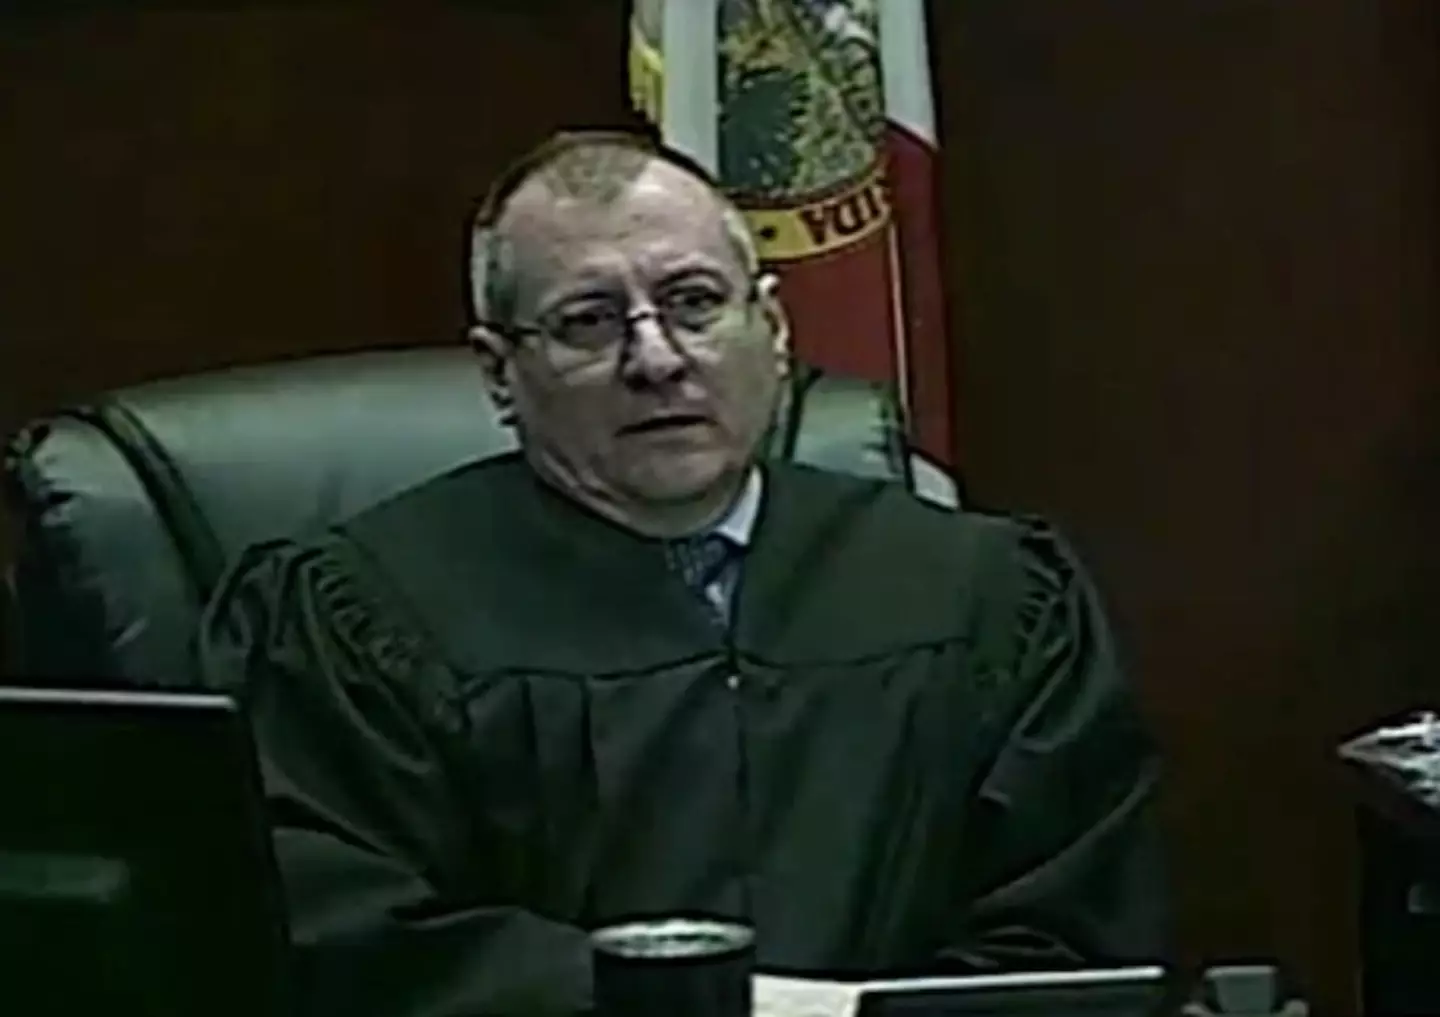 Judge Wayne Culver has been suspended over an outburst he had in court.